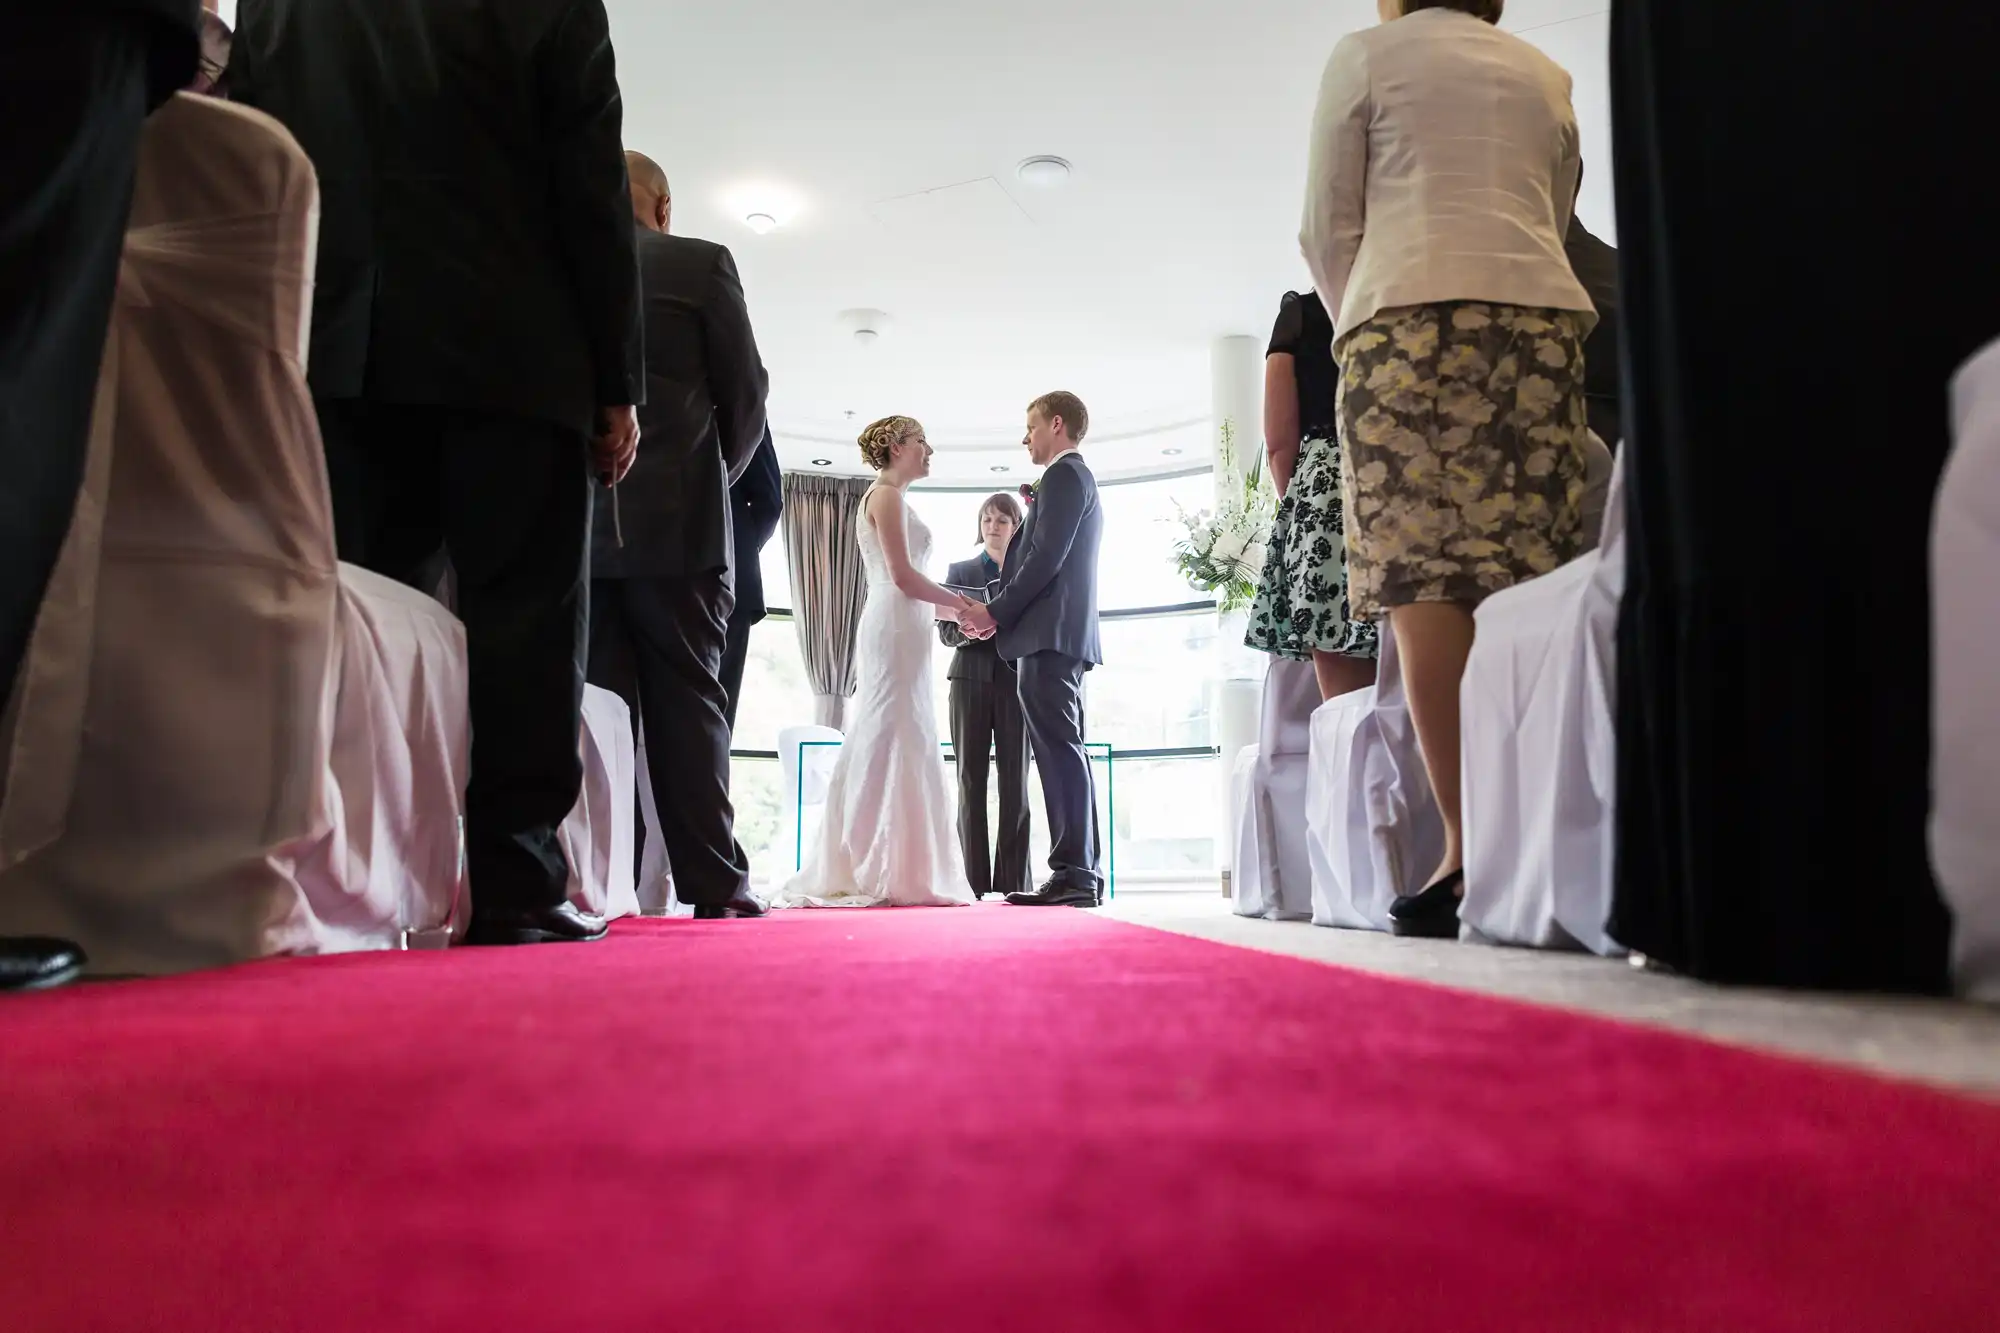 A bride and groom hold hands during a wedding ceremony, viewed from a low angle along a red carpet aisle, surrounded by guests standing.